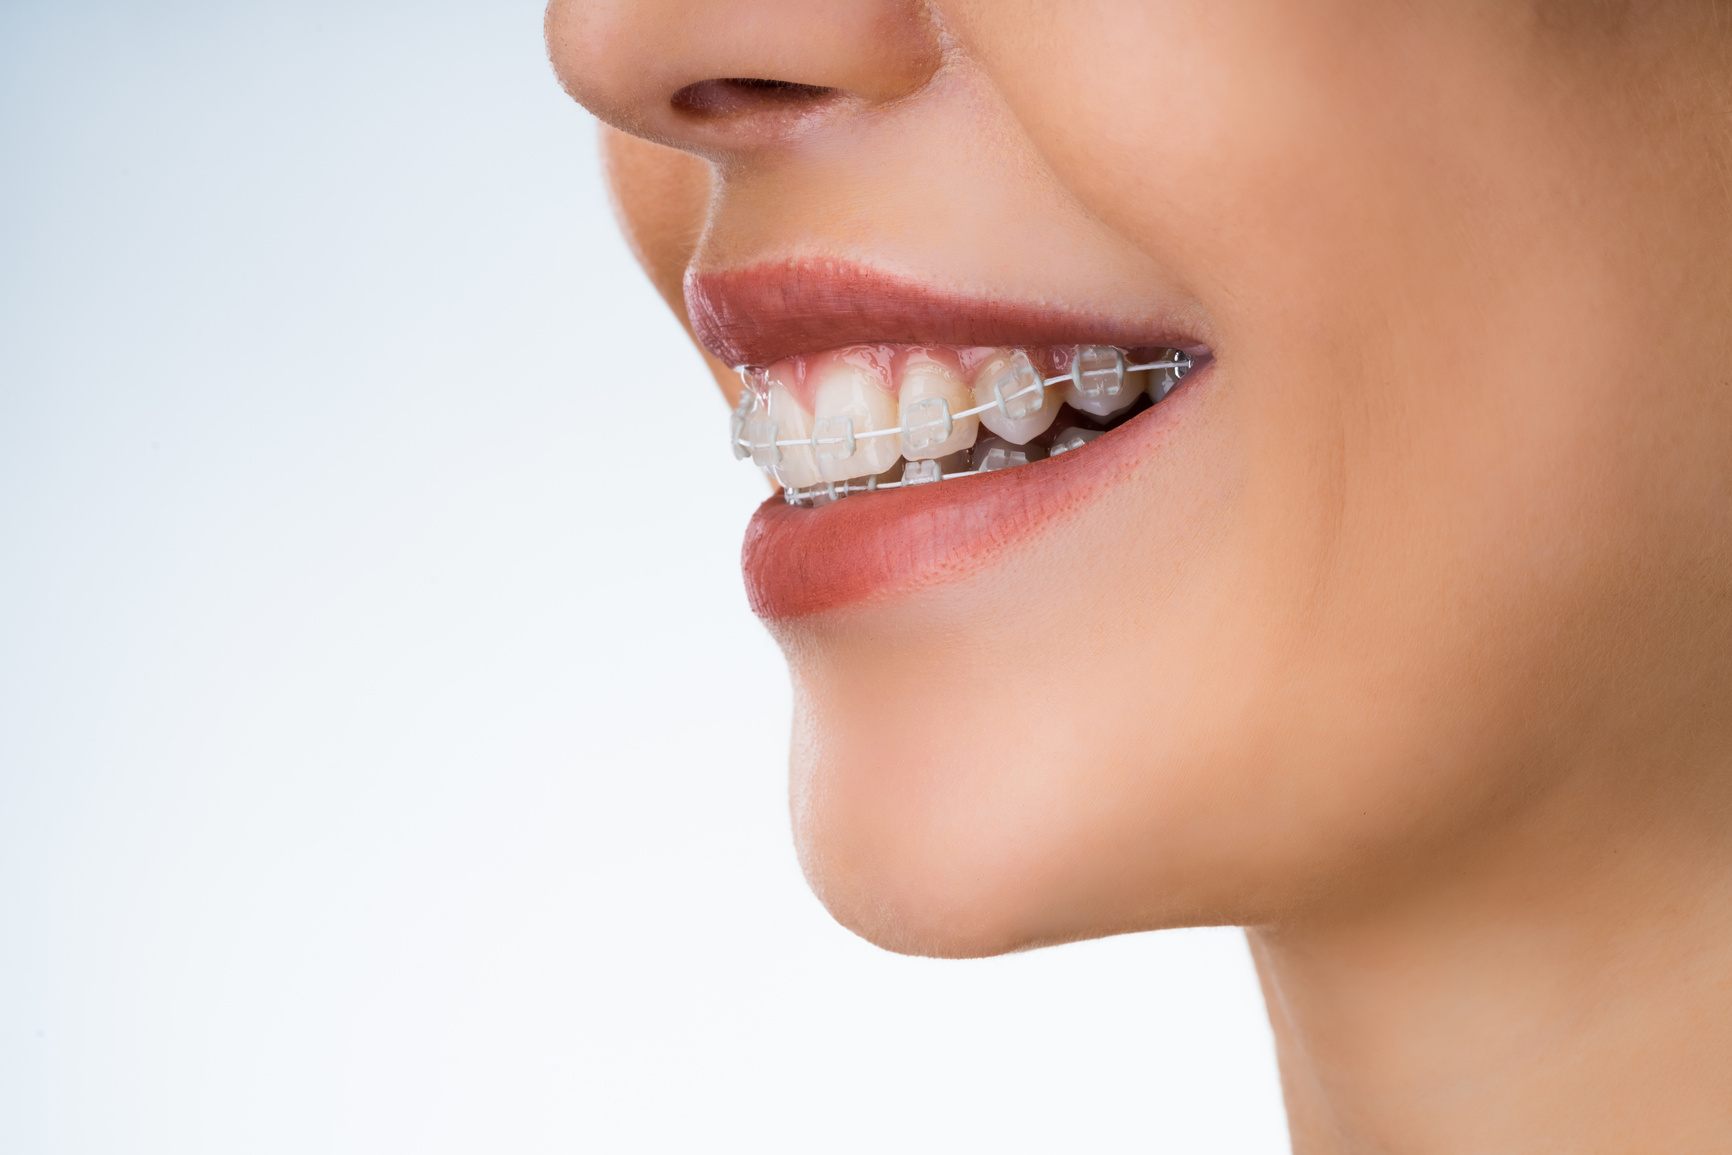 Female Mouth With Metal White Dental Braces